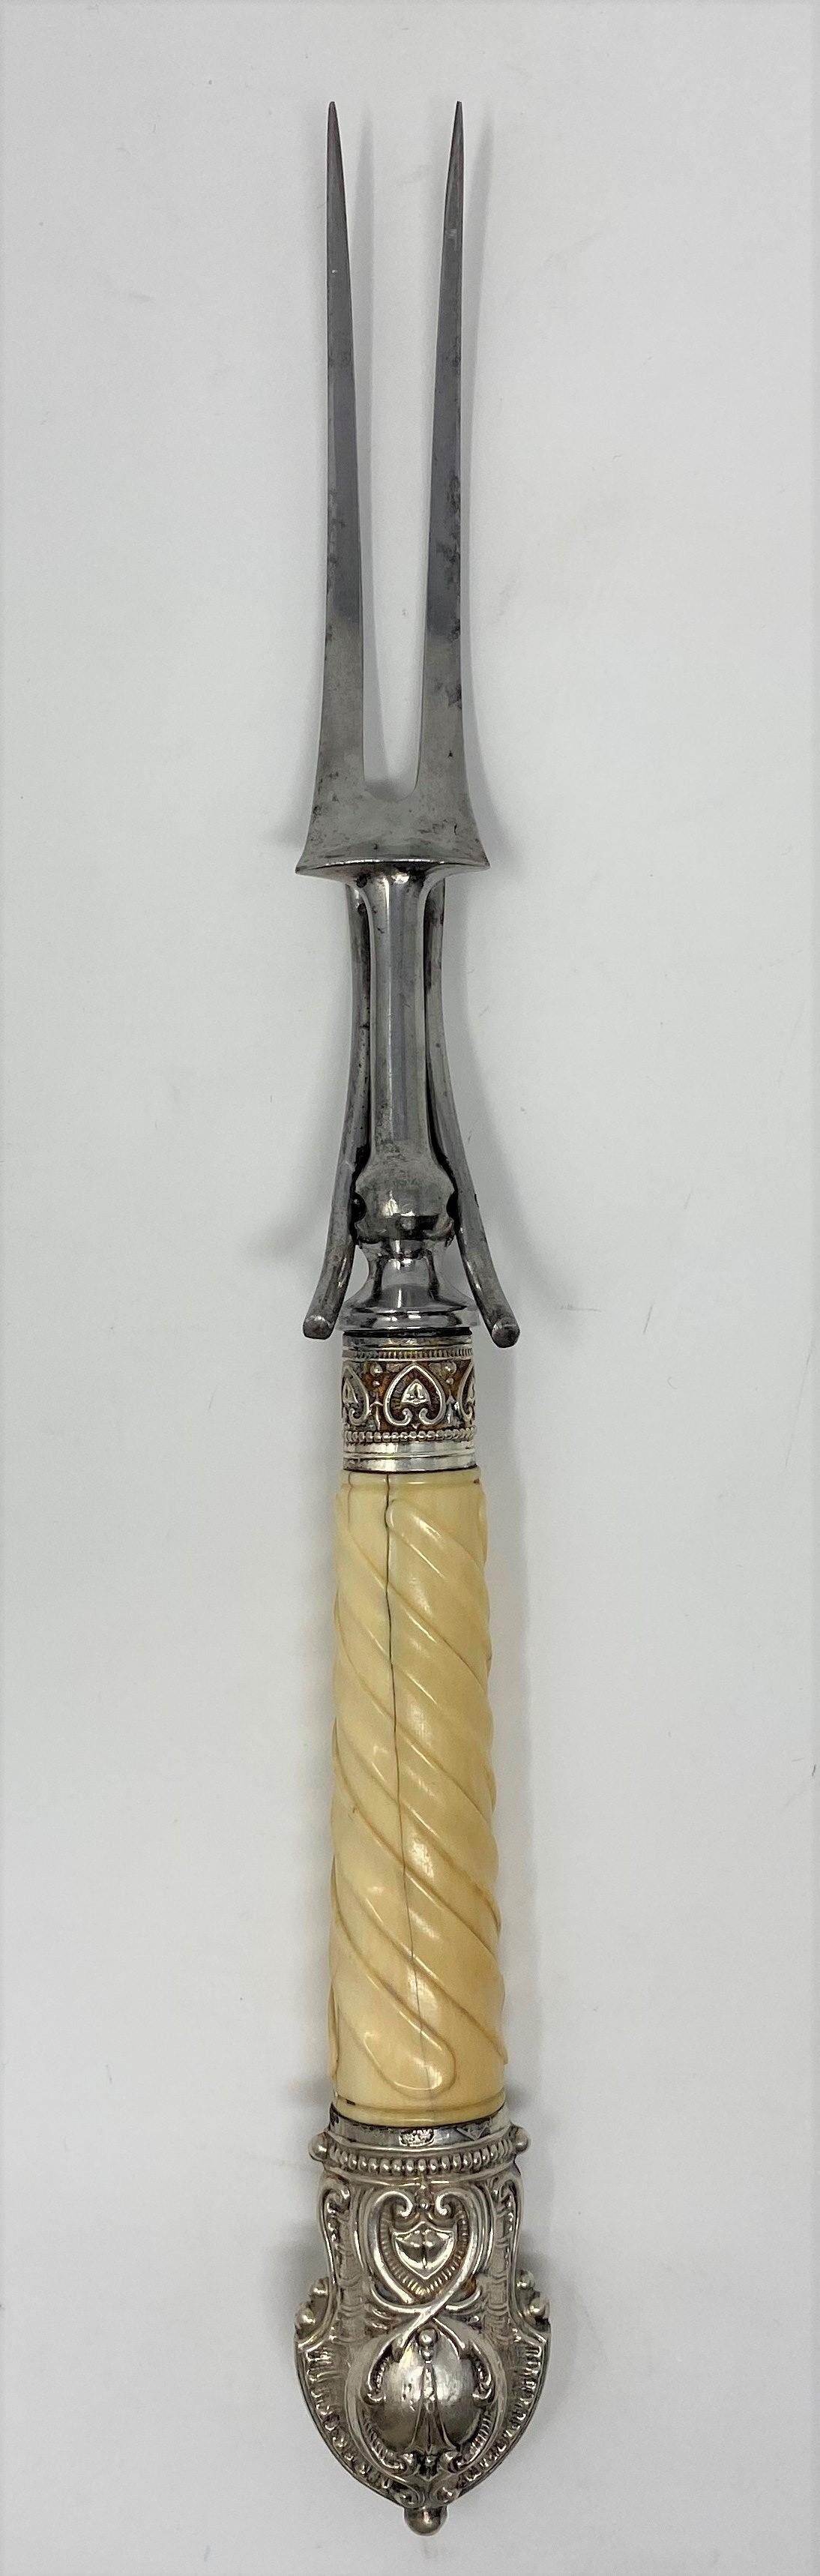 Antique Victorian 3-piece carving set with carved ox bone handles, circa 1880.
Measures: Large knife 16